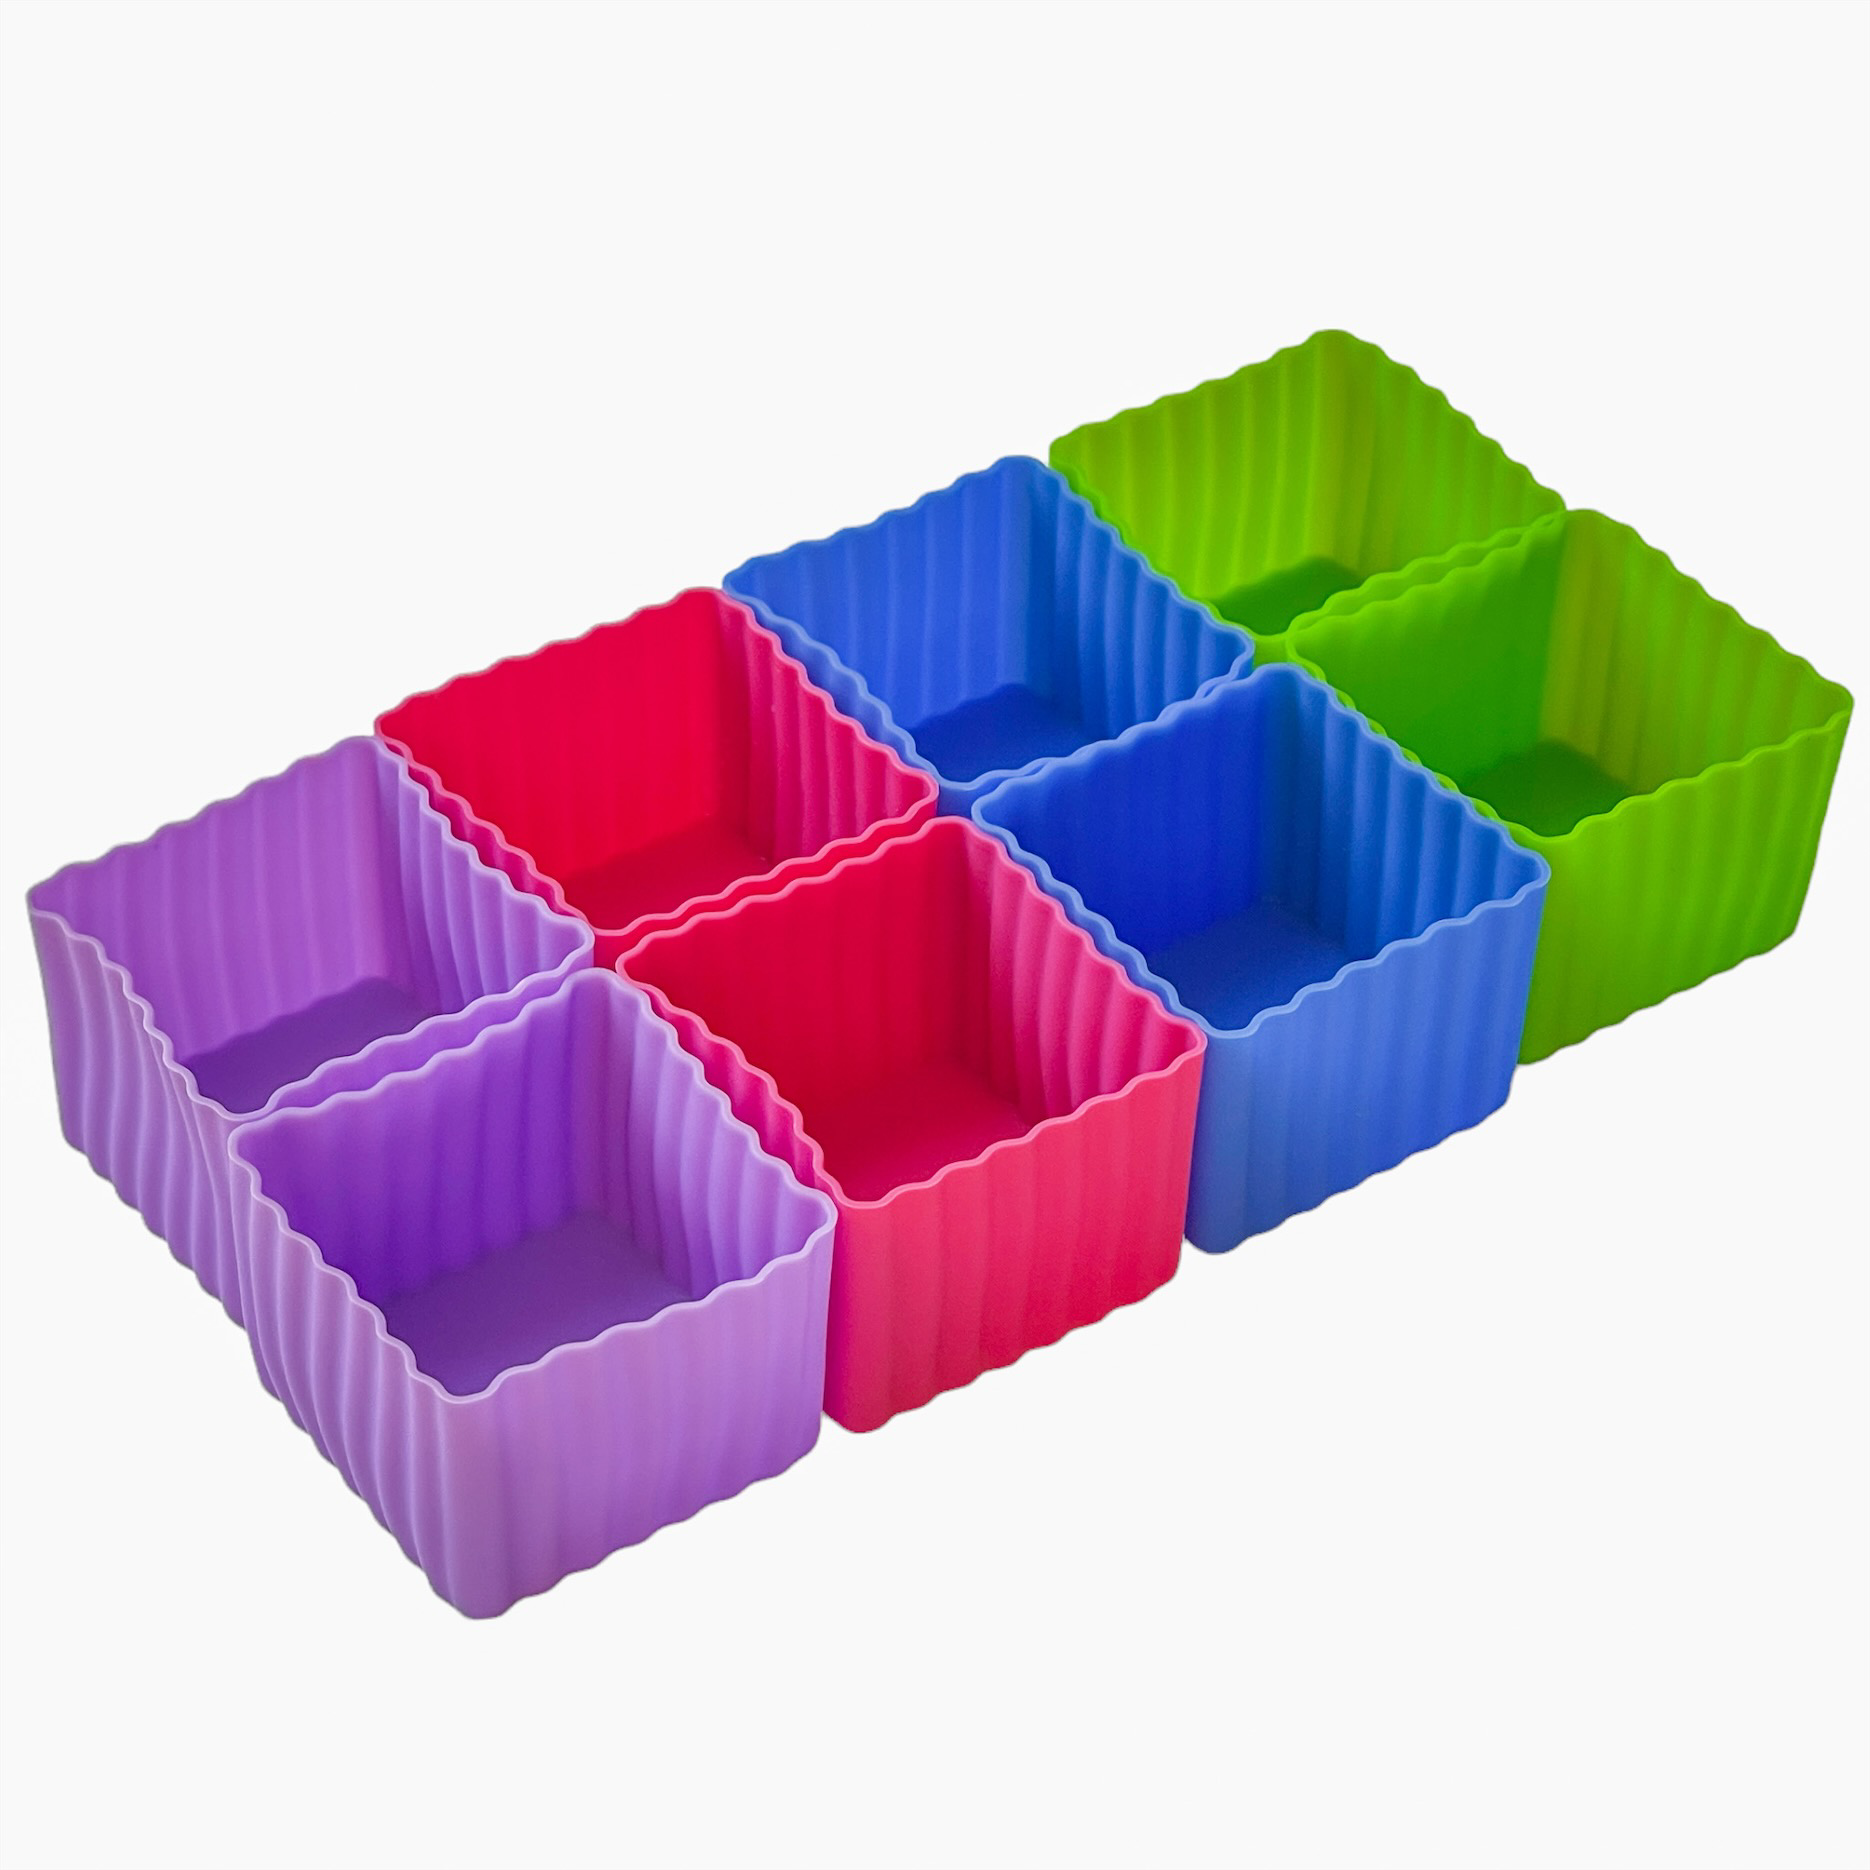 Yumbox silicone set of 8 Cubes - multicolour-1